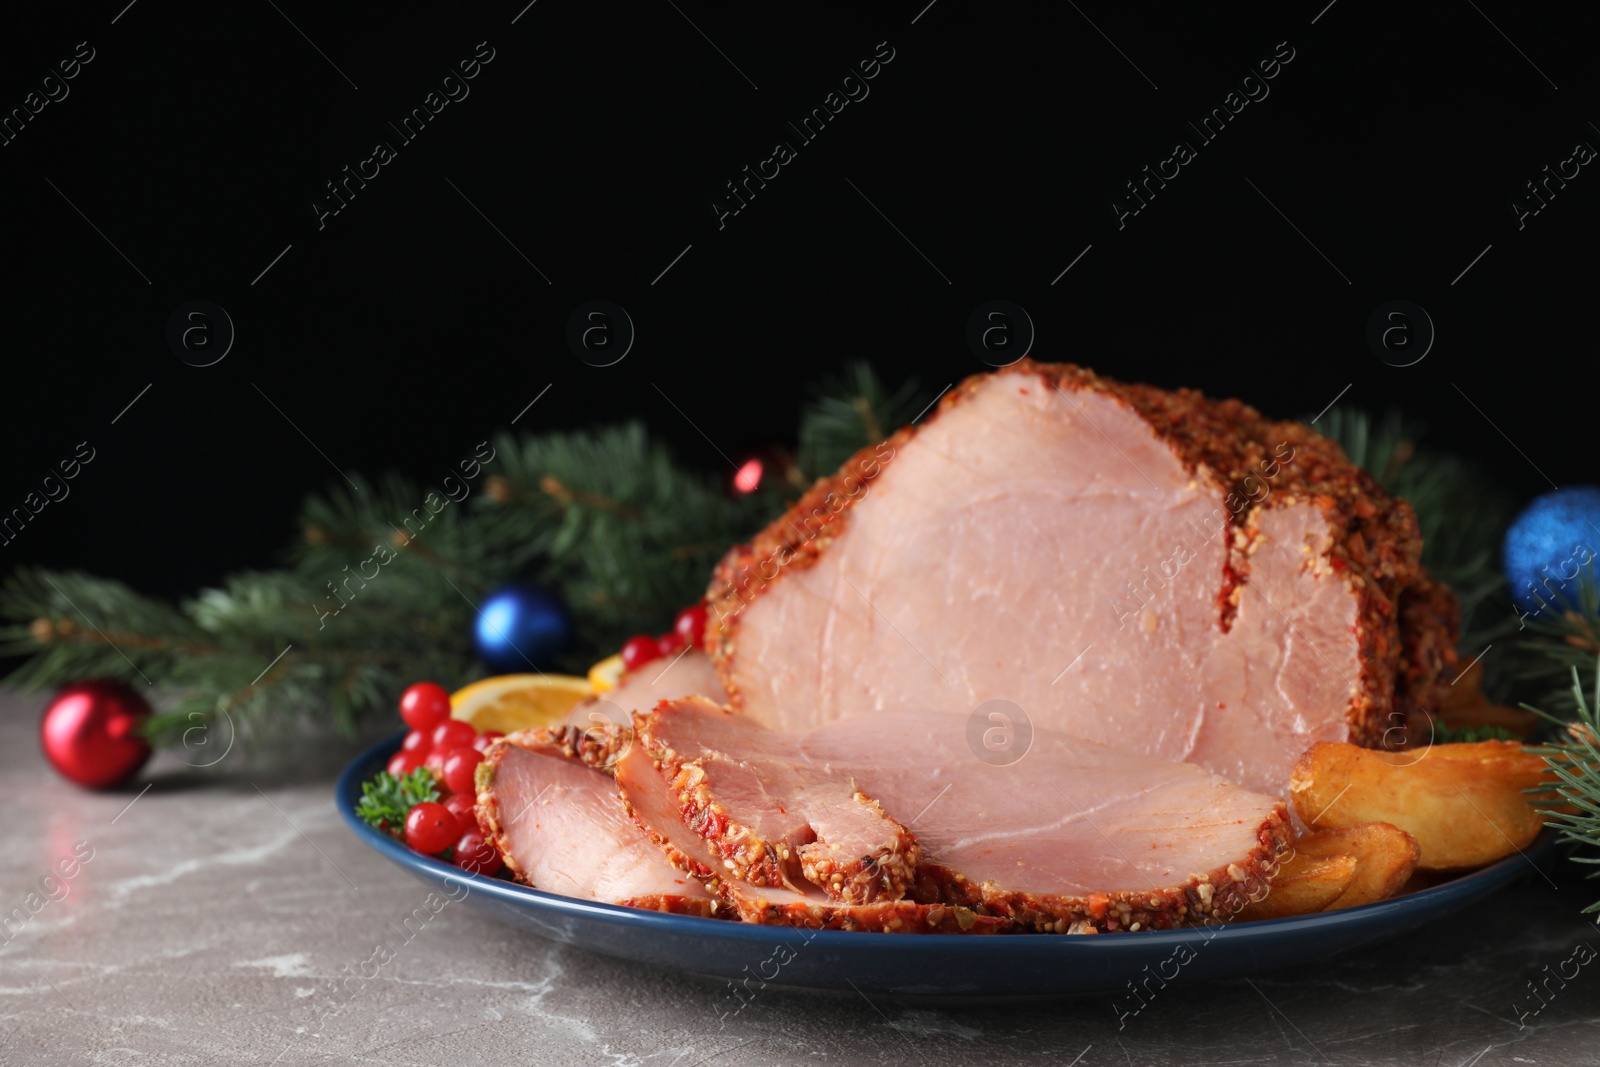 Photo of Plate with Christmas ham on grey table against black background